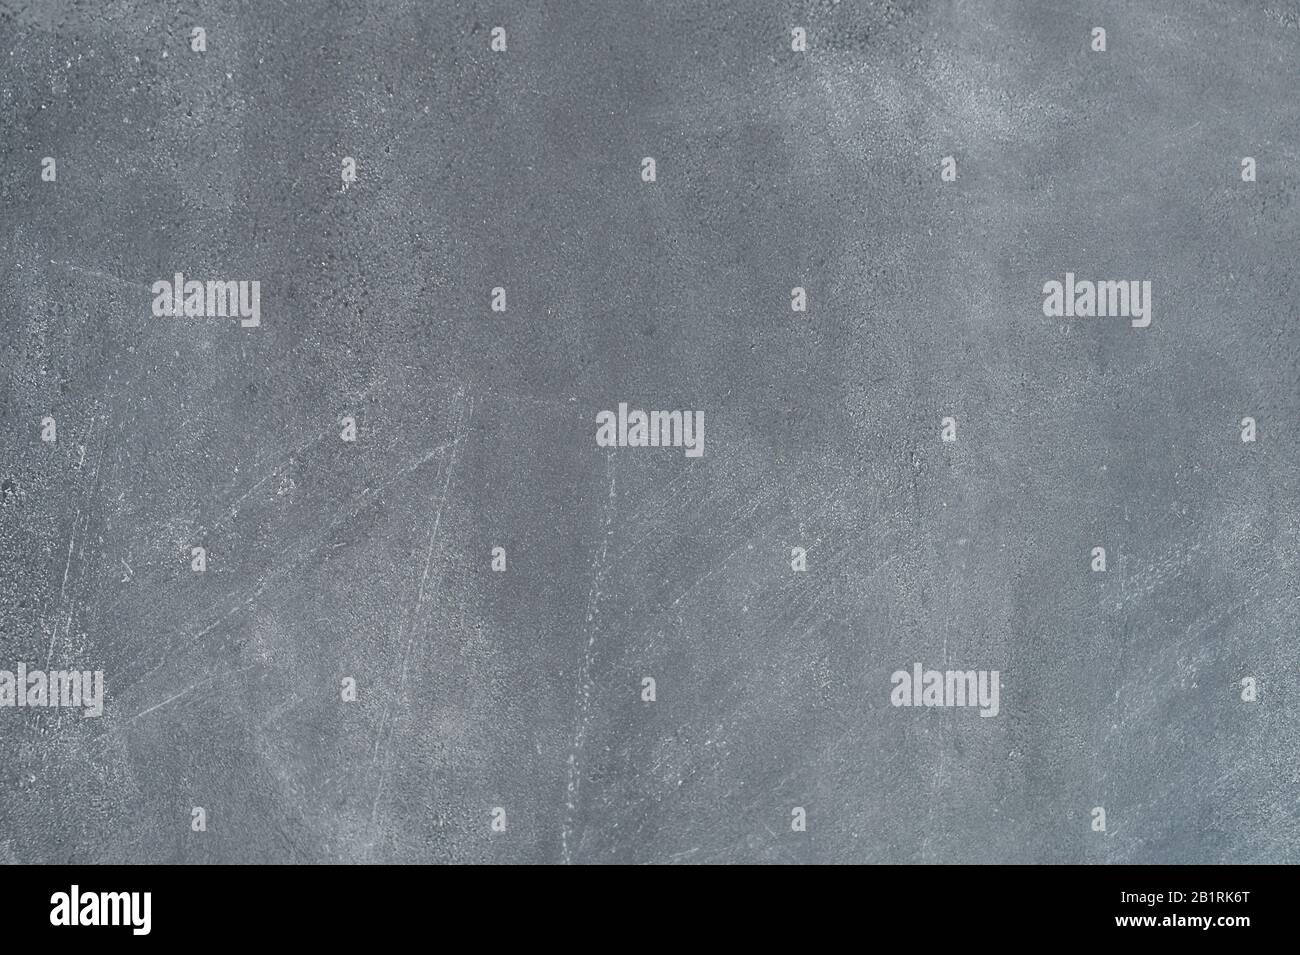 Gray drawing board texture abstract background close up view Stock Photo